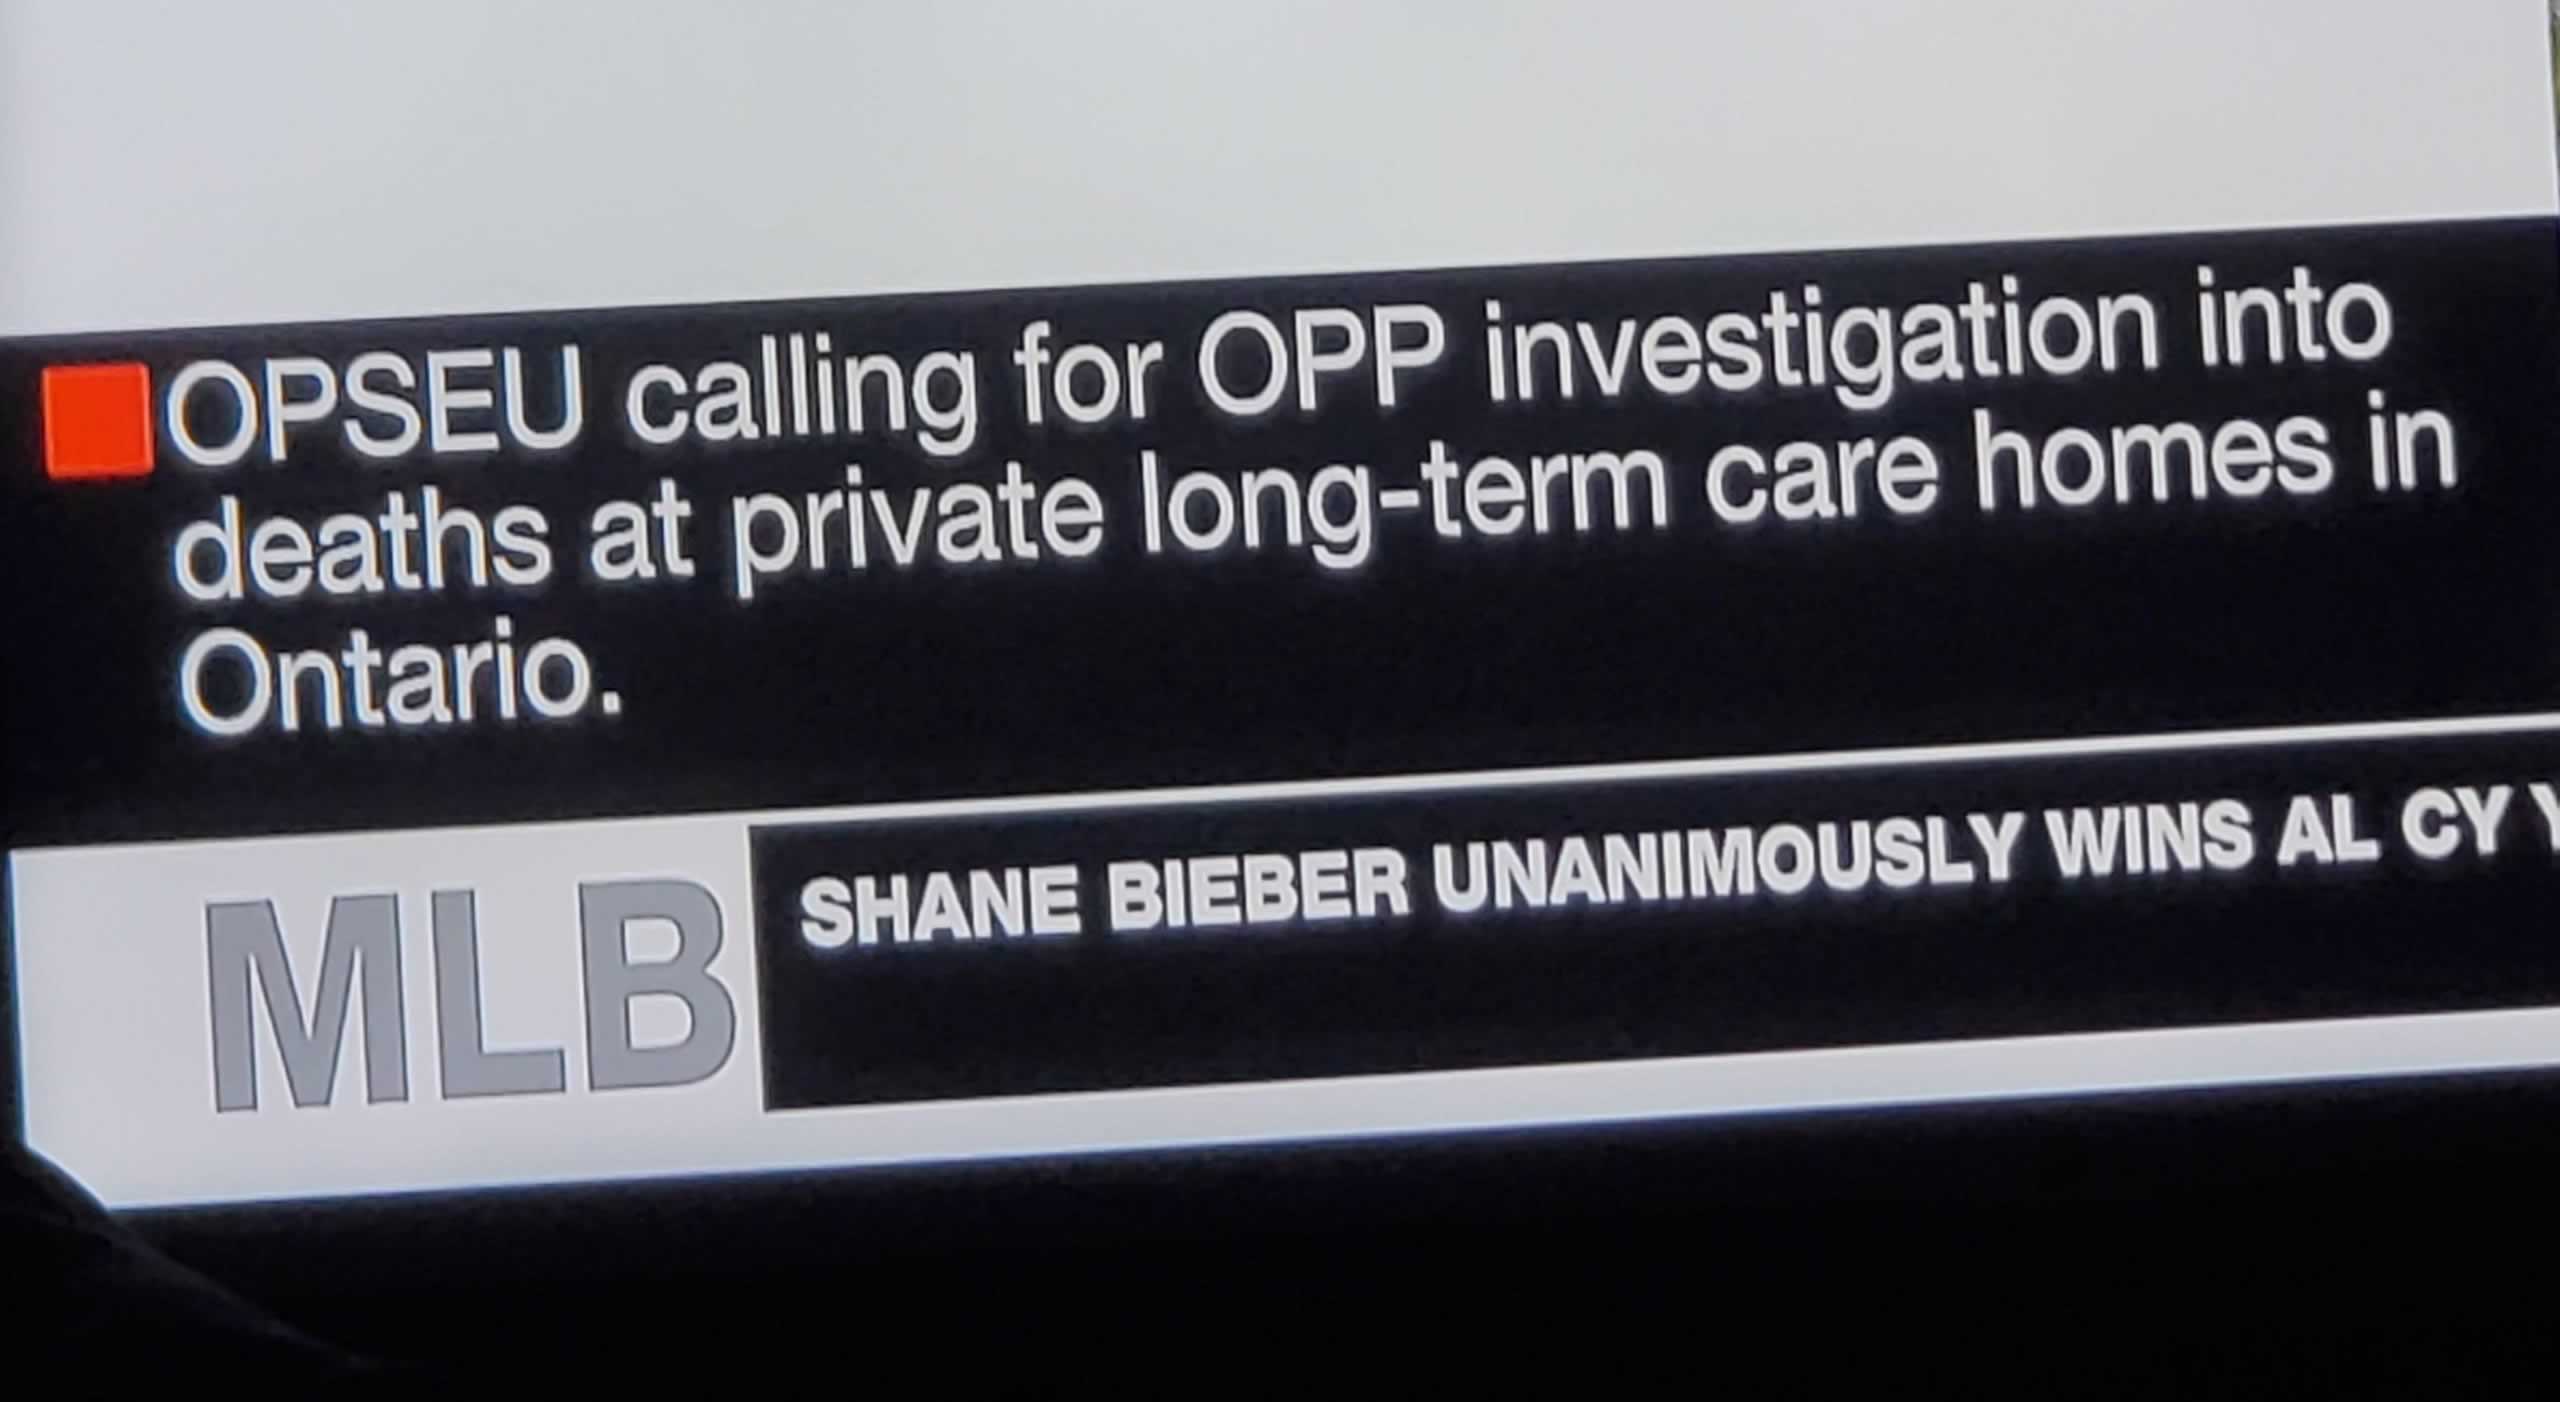 CP24 headline: OPSEU calling for OPP investigation